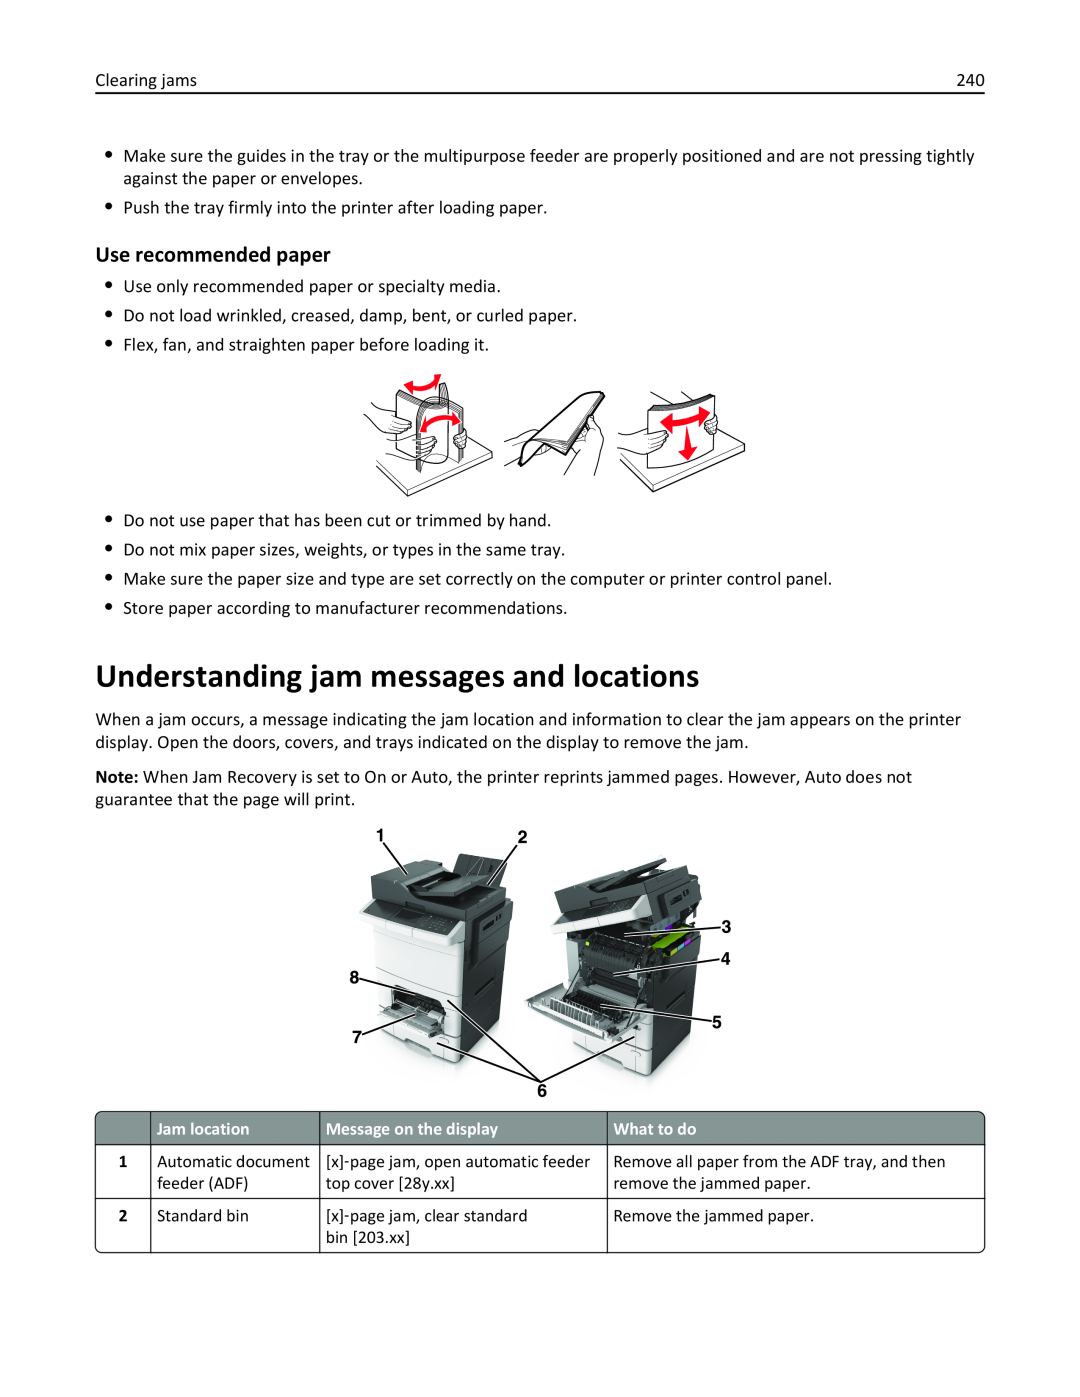 Lexmark 436 manual Understanding jam messages and locations, Use recommended paper 